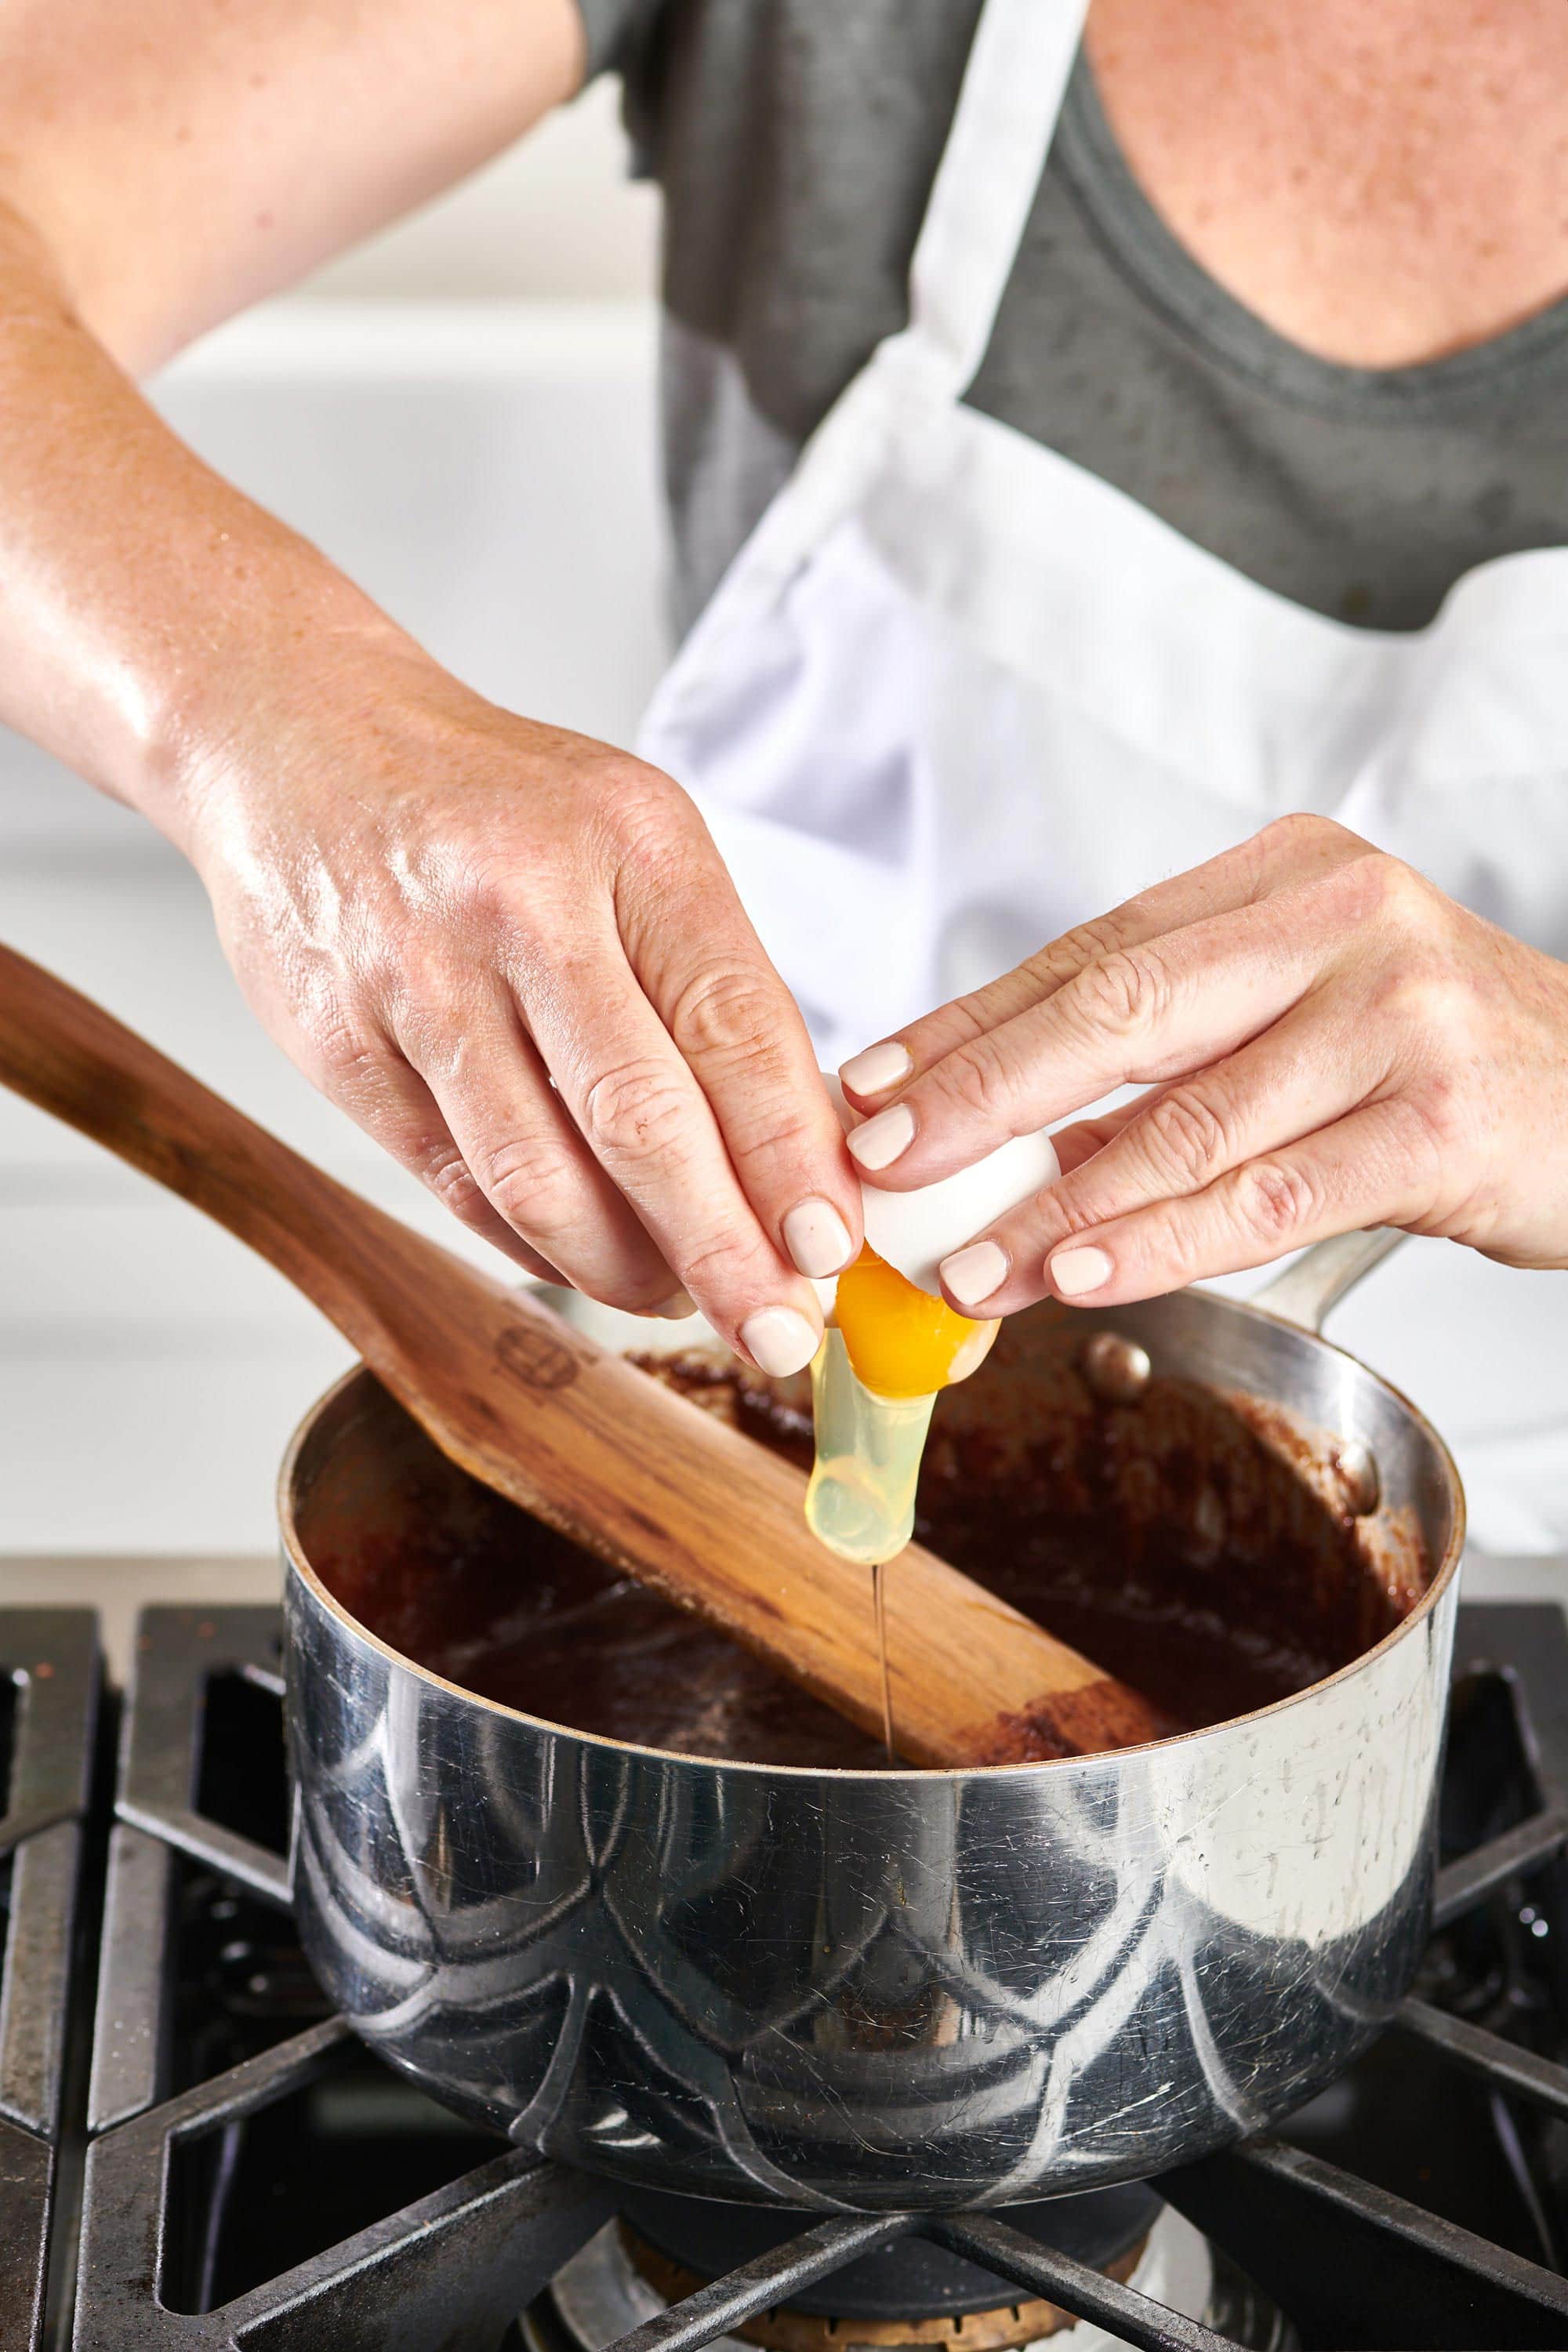 Woman cracking an egg into a pan of chocolate.